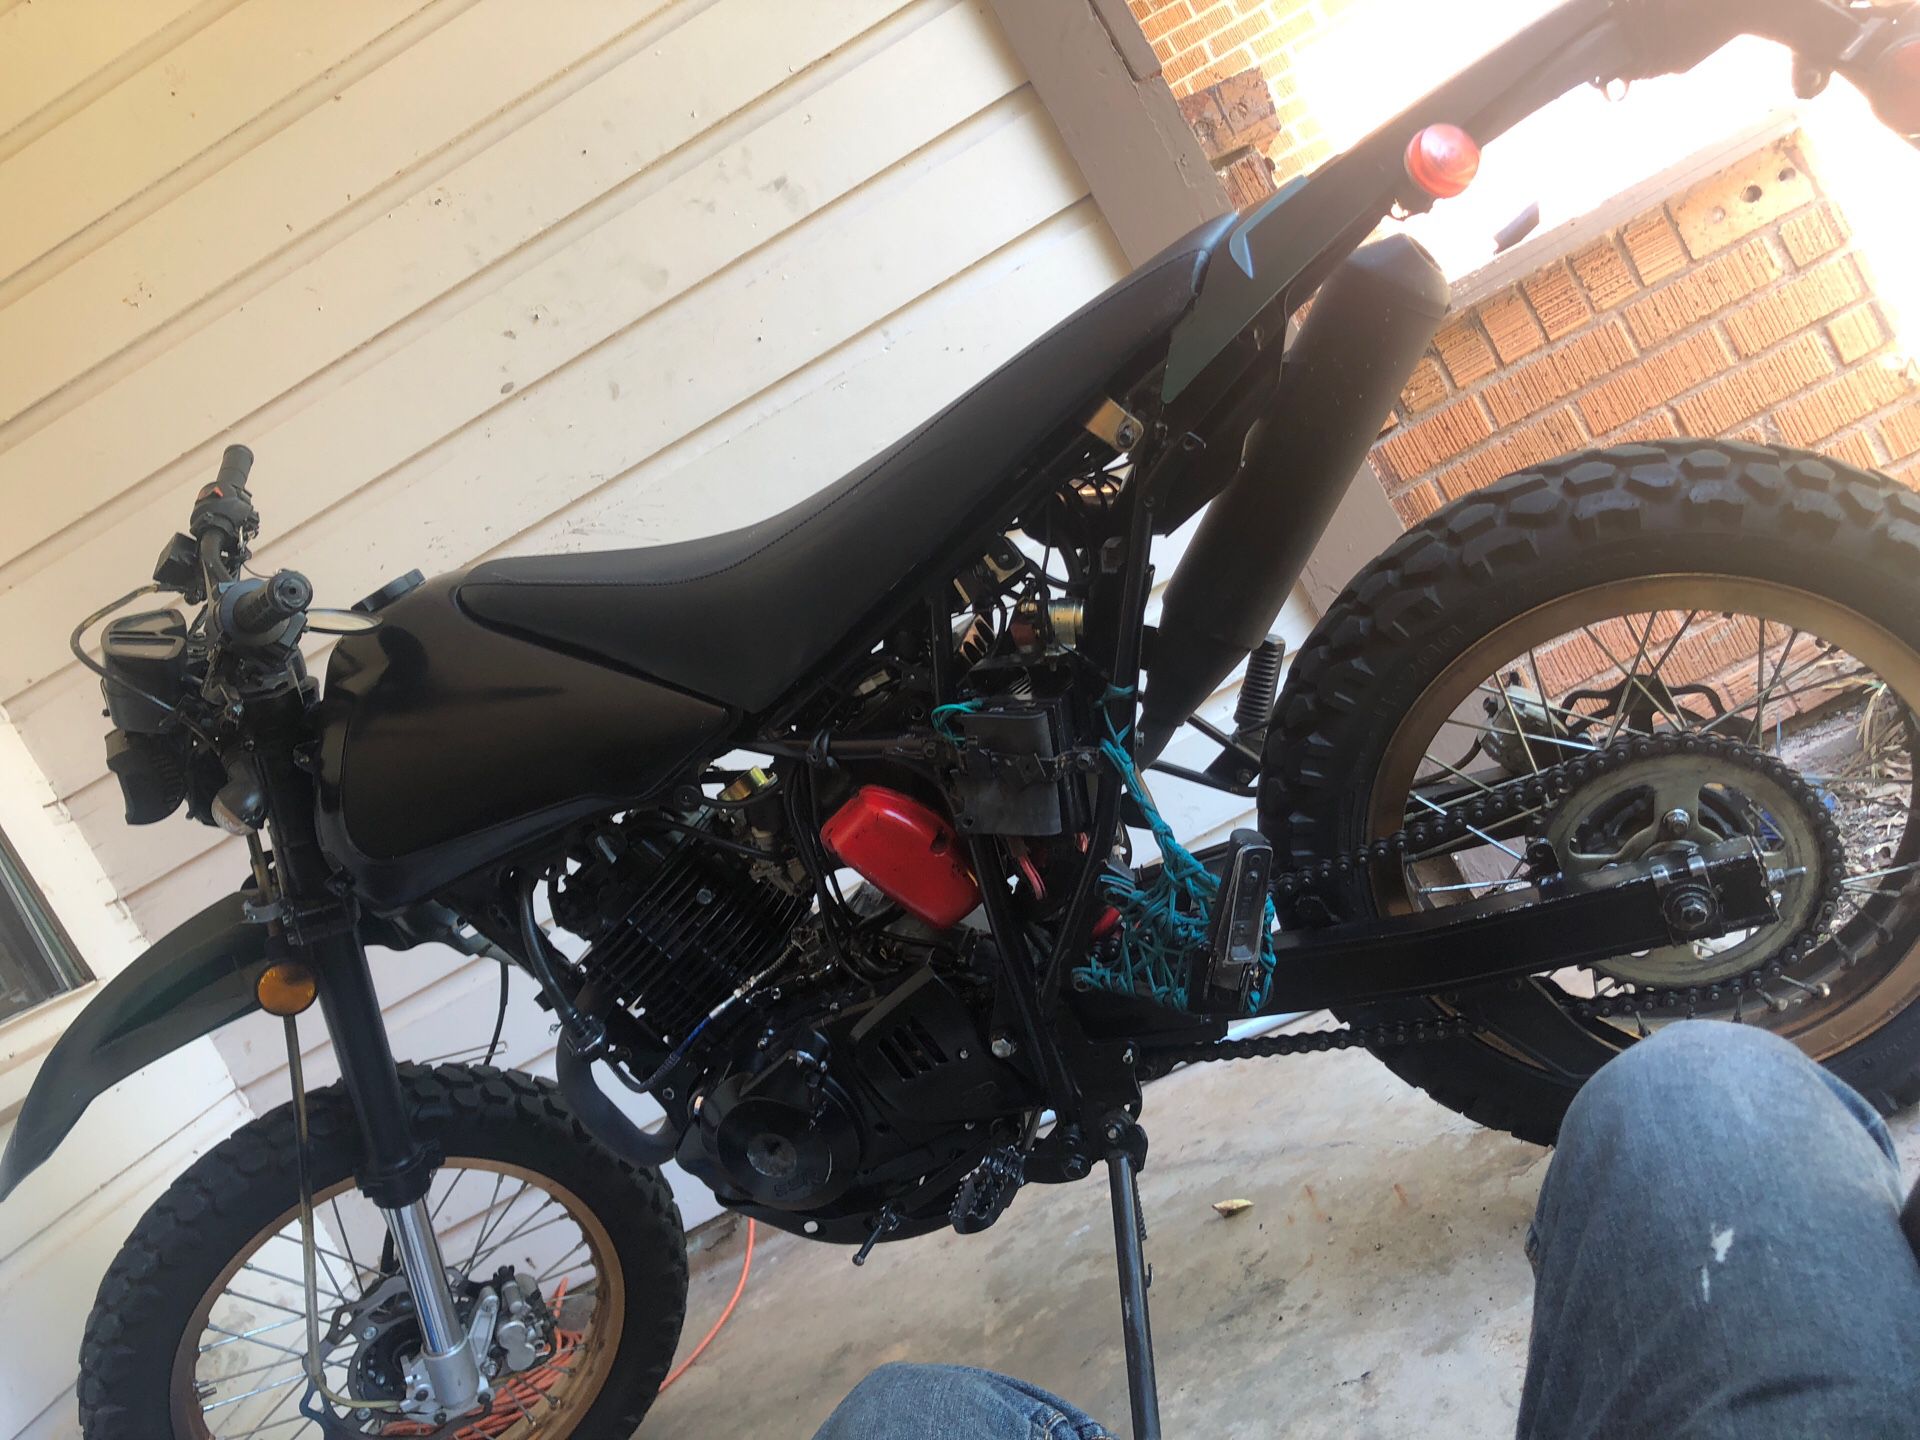 Photo 2014 Xf250cc ssr enduro title in hand. Is street legal. Serious buyers only. This is a badass bike my husband is just ready for bigger bike now